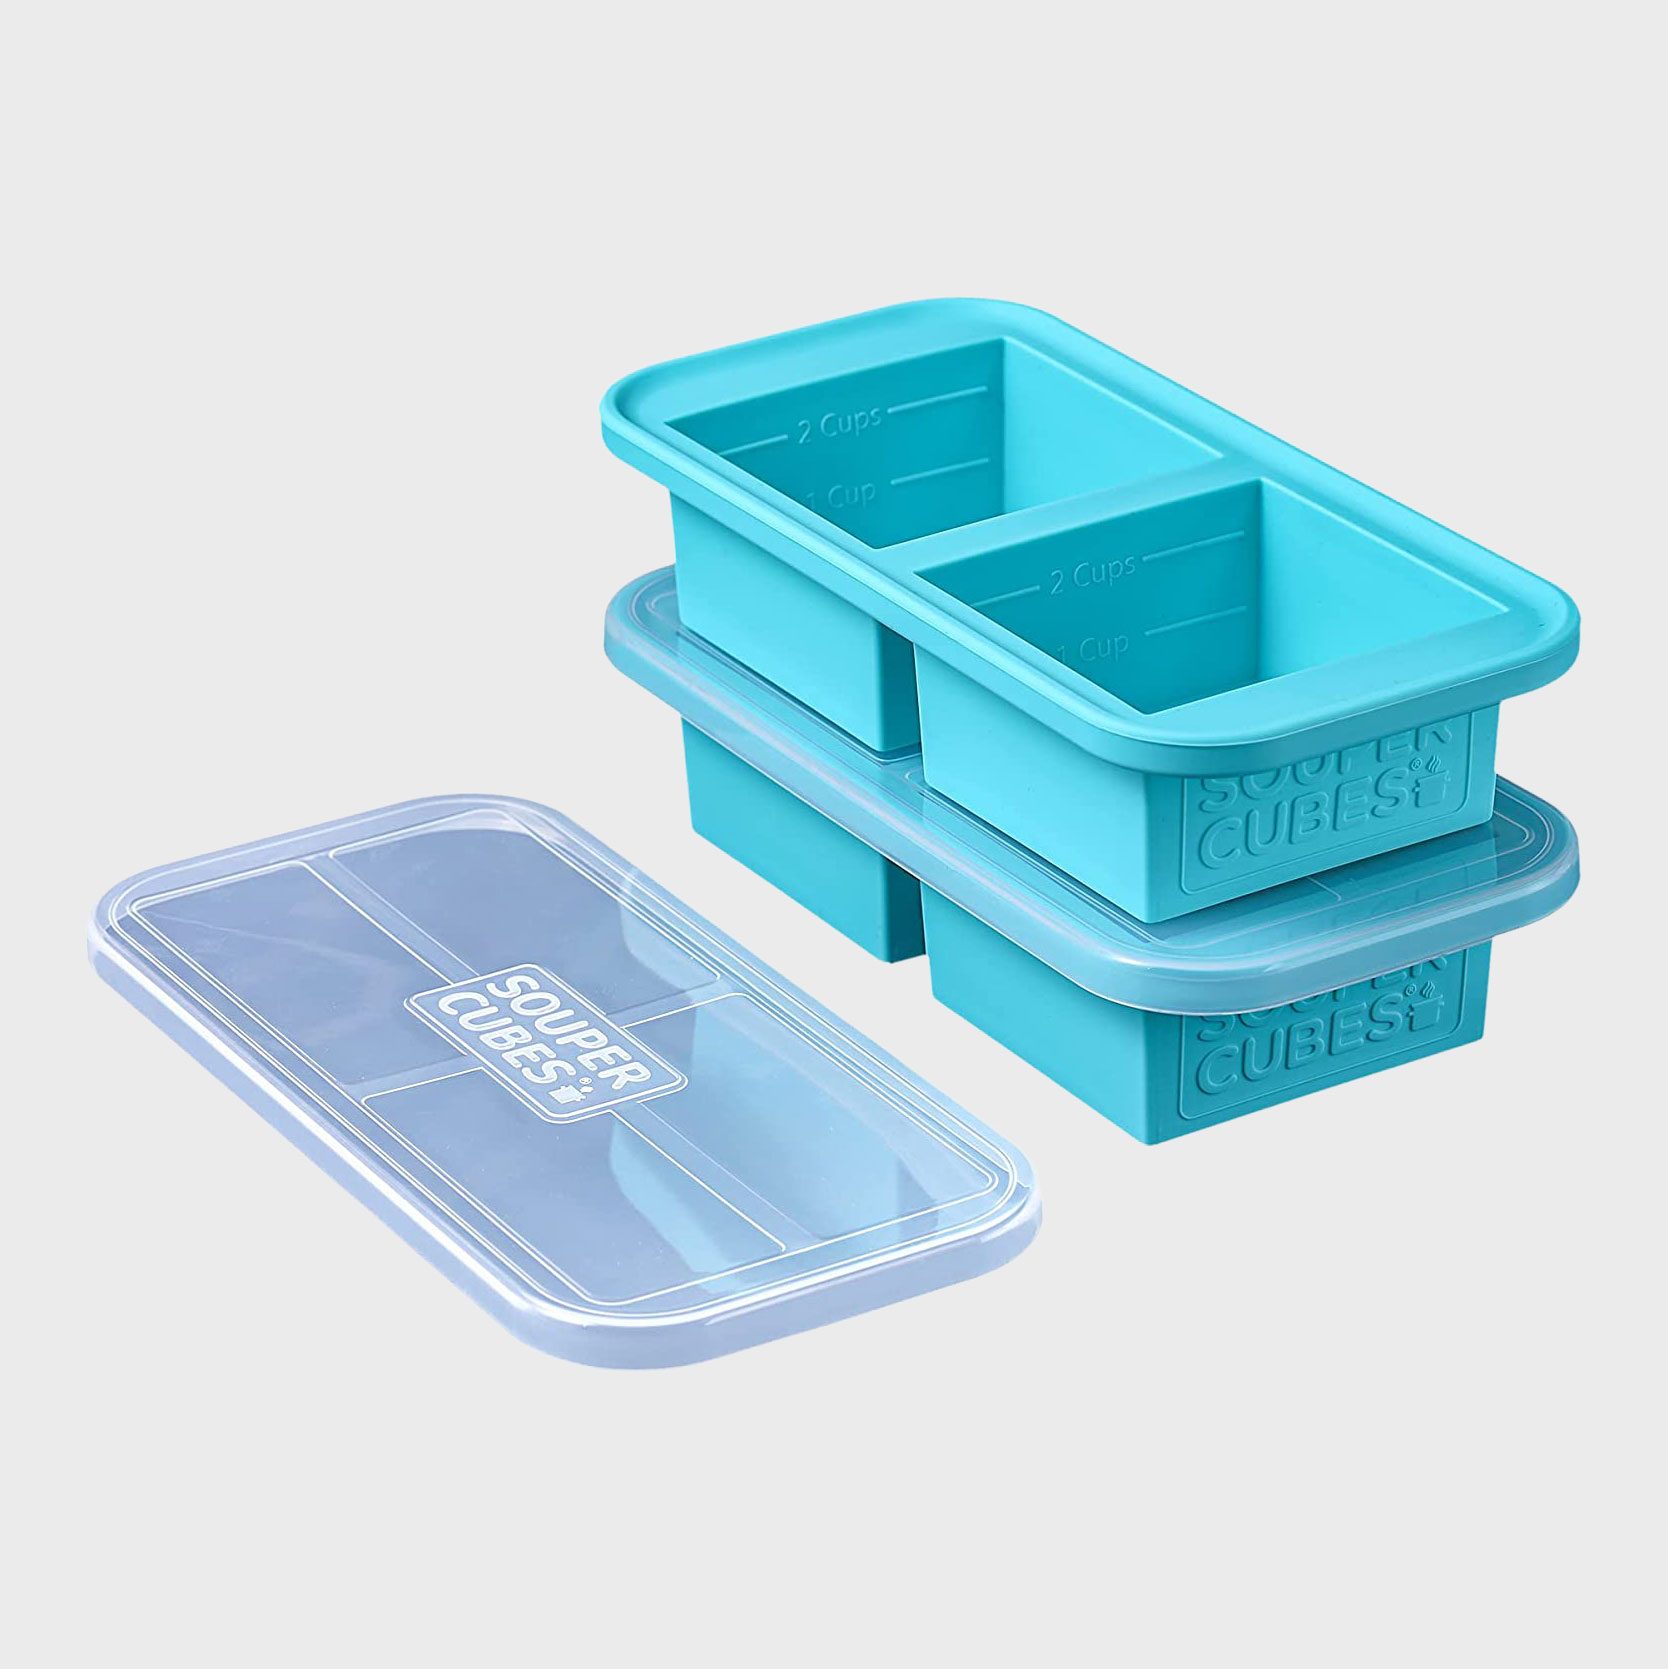 https://www.rd.com/wp-content/uploads/2022/11/Souper-Cubes-2-Cup-Extra-Large-Silicone-Freezer-Tray-with-lid-2-pack_ecomm_via-amazon.com_.jpg?fit=700%2C700